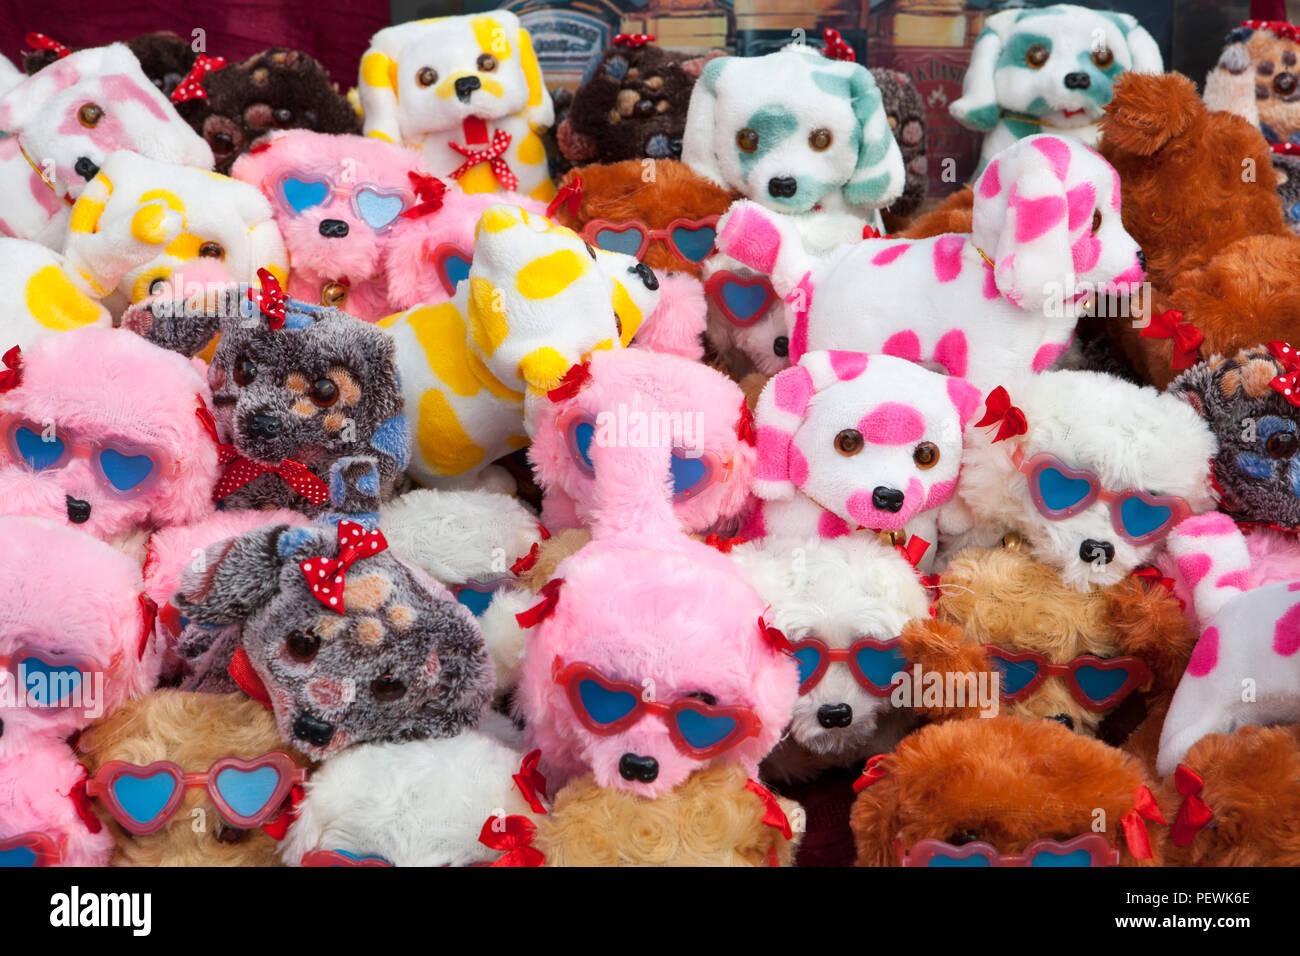 Plastic children's toys at a market stand, Germany, Europe Stock Photo